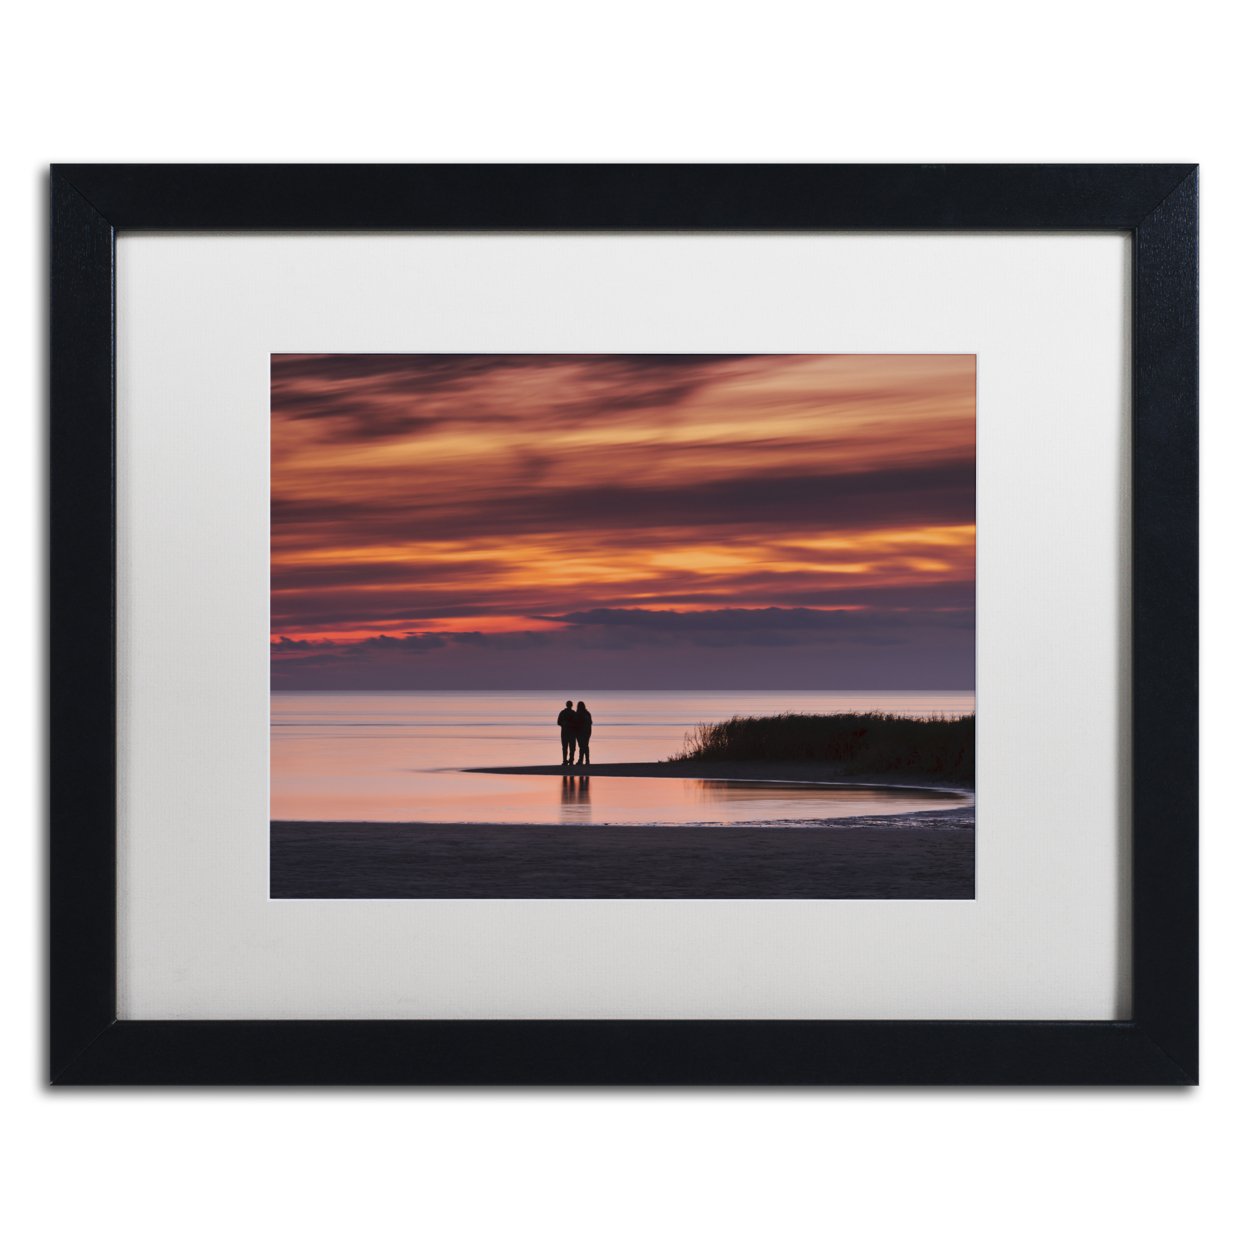 Michael Blanchette Photography 'Romantic Sunset' Black Wooden Framed Art 18 X 22 Inches